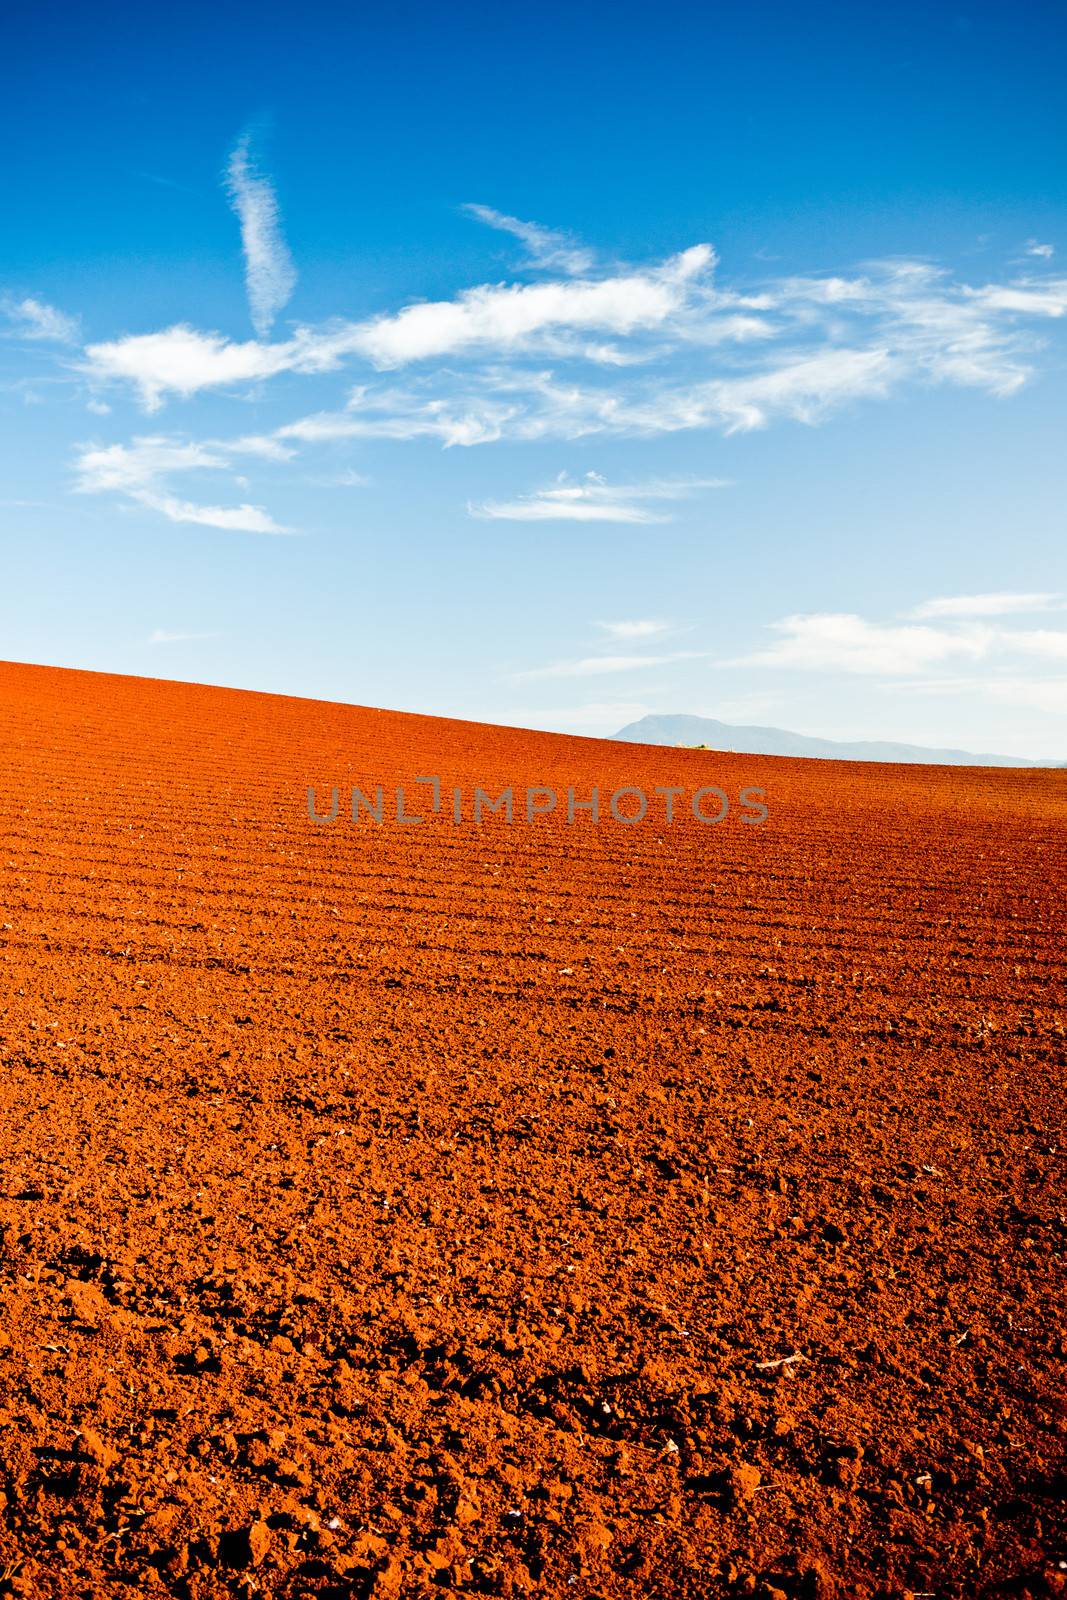 Ploughed red earth in late evening sun glowing richly in the golden light in a beautiful environmental landscape of agricultural land